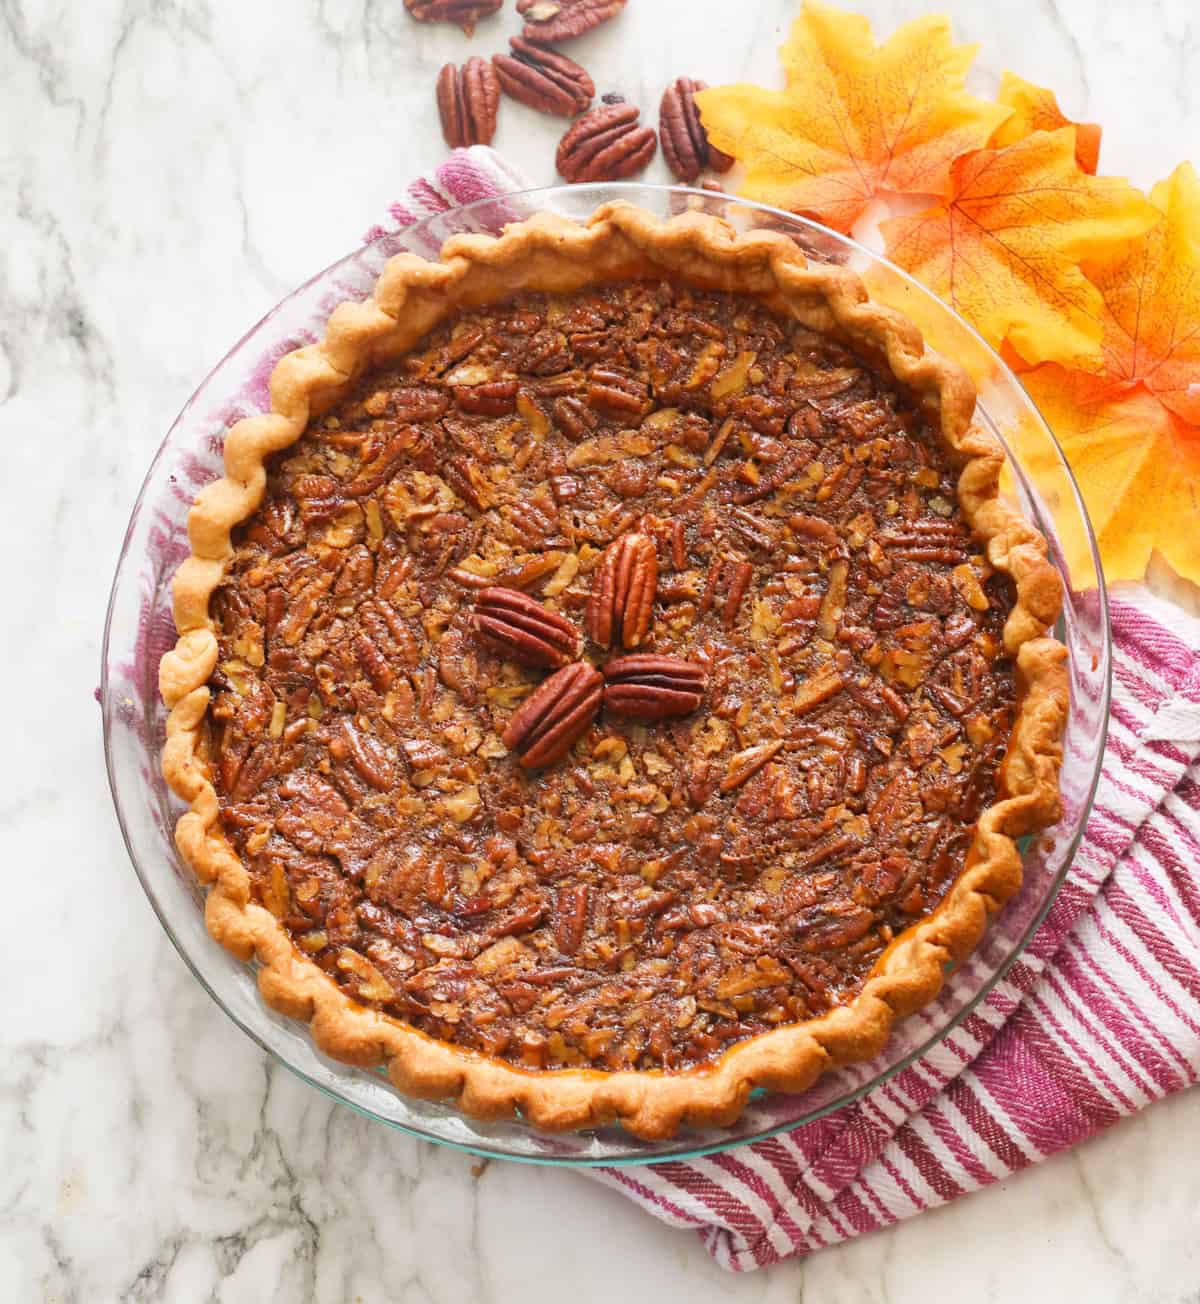 A whole pecan pie with fall decoration in the background